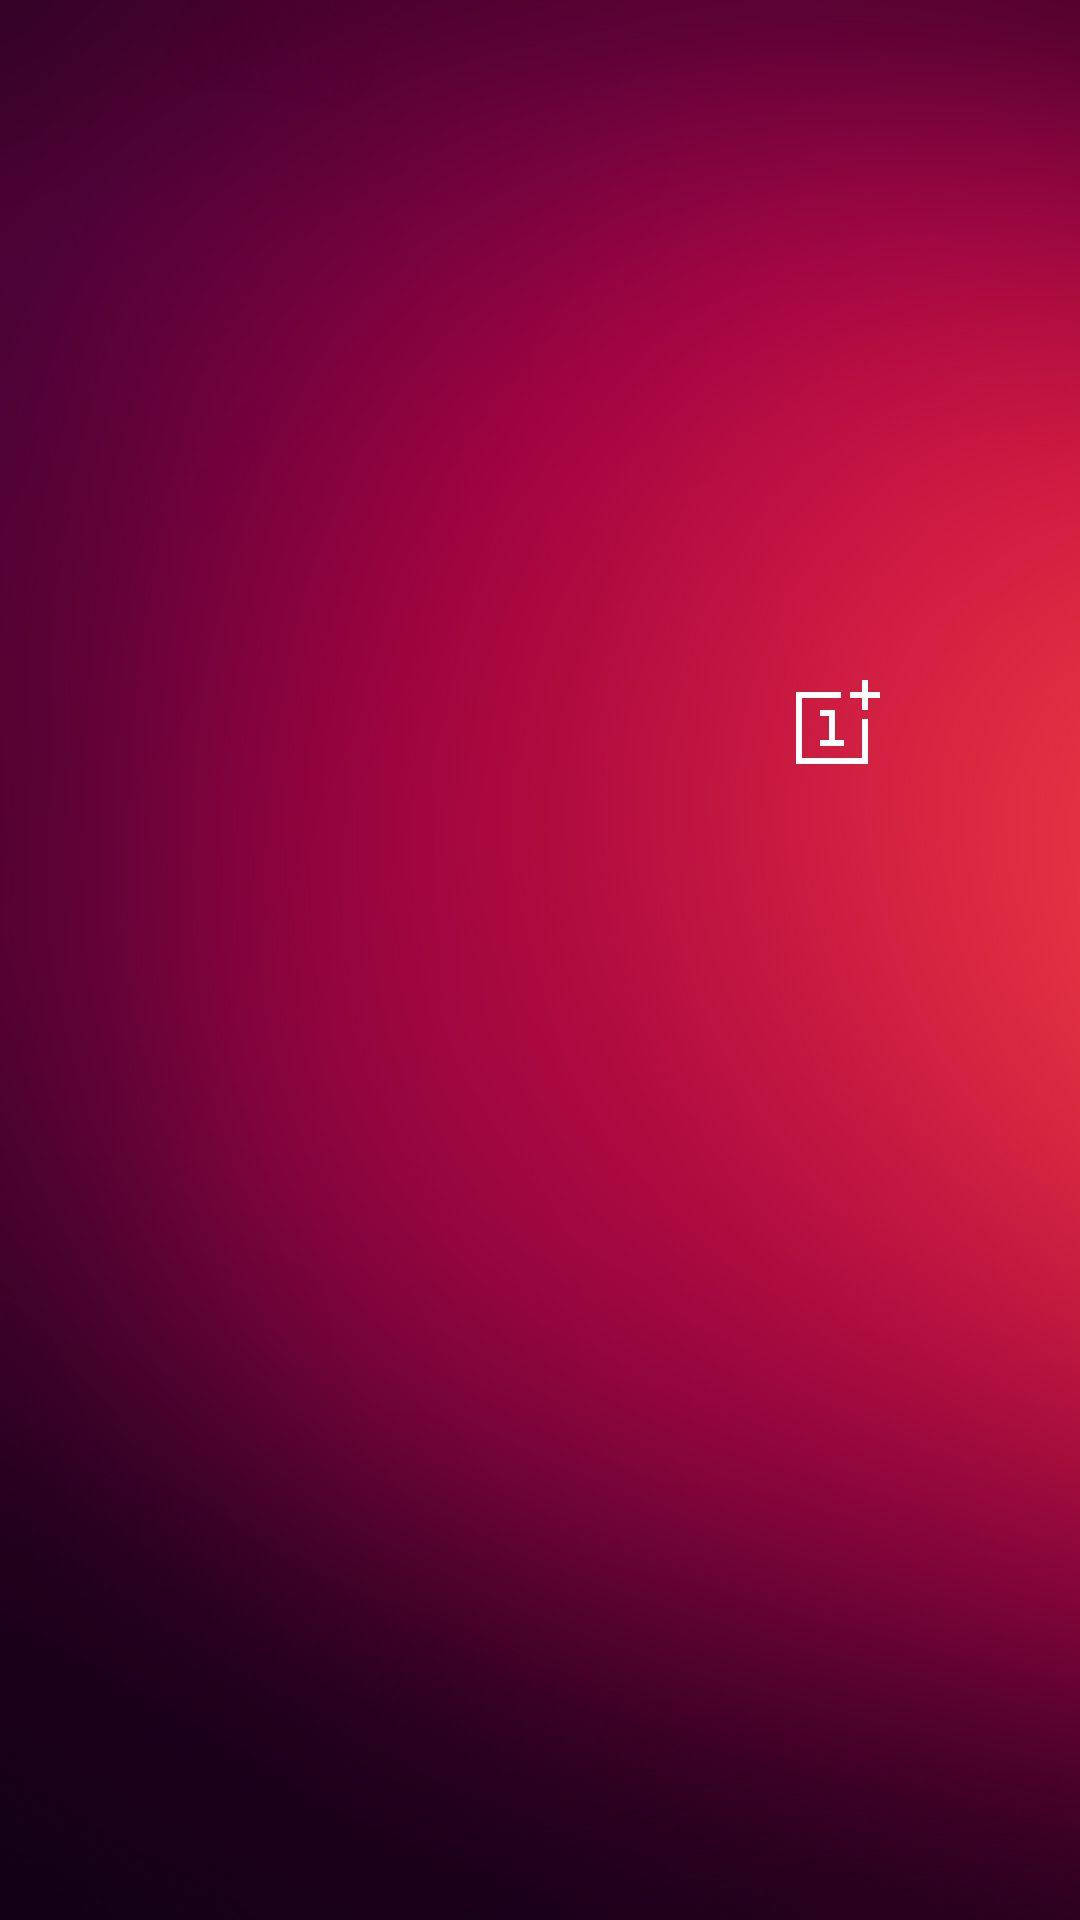 Oneplus Logo On Red Background